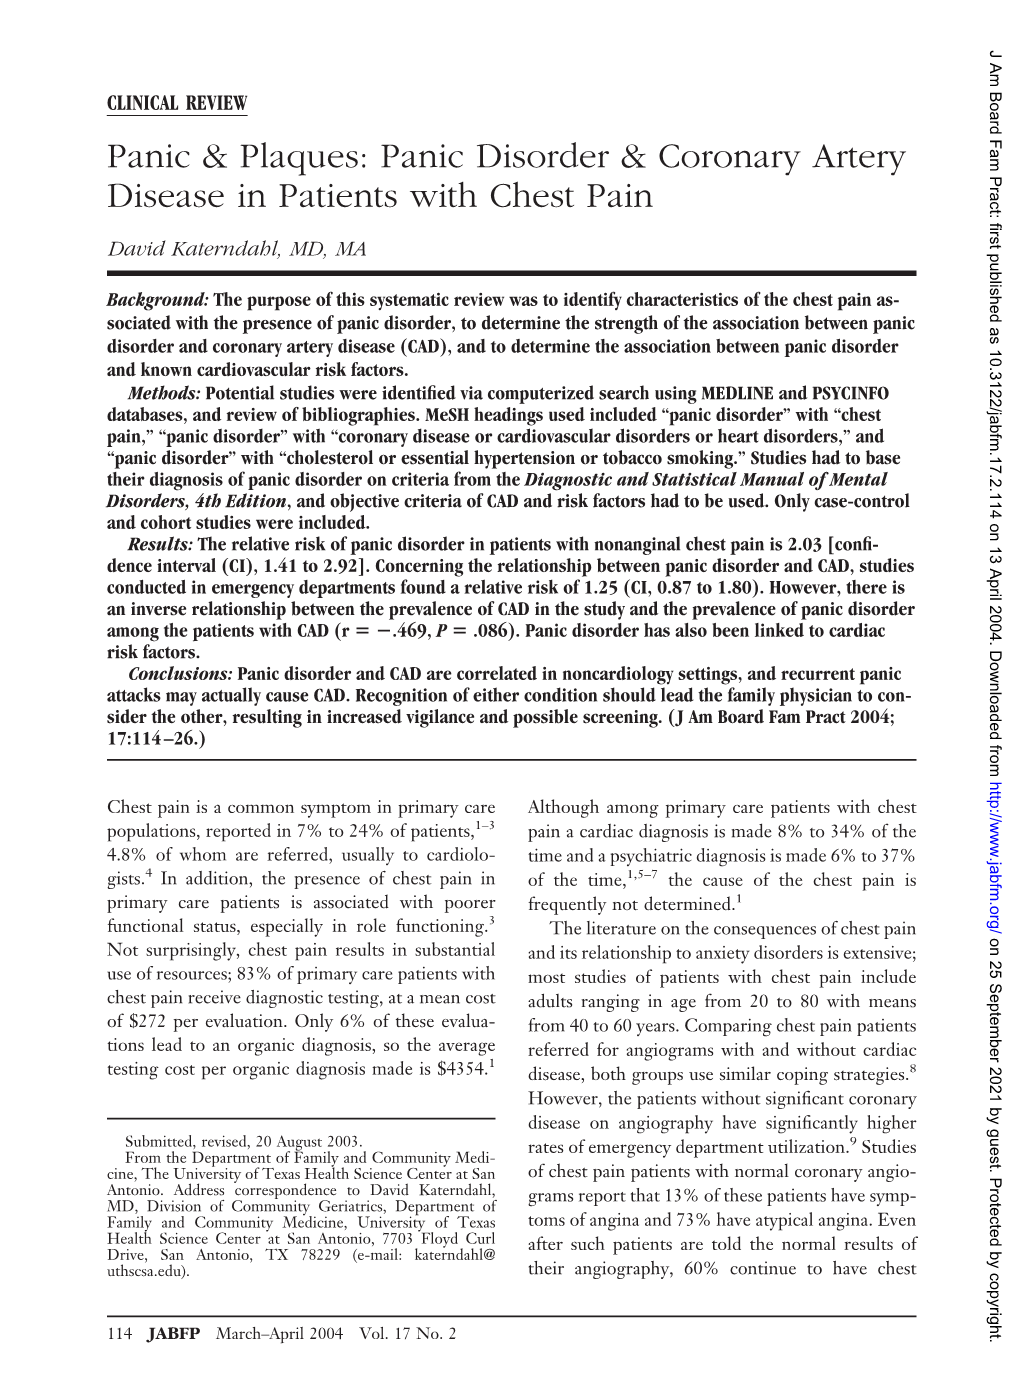 Panic Disorder & Coronary Artery Disease in Patients with Chest Pain